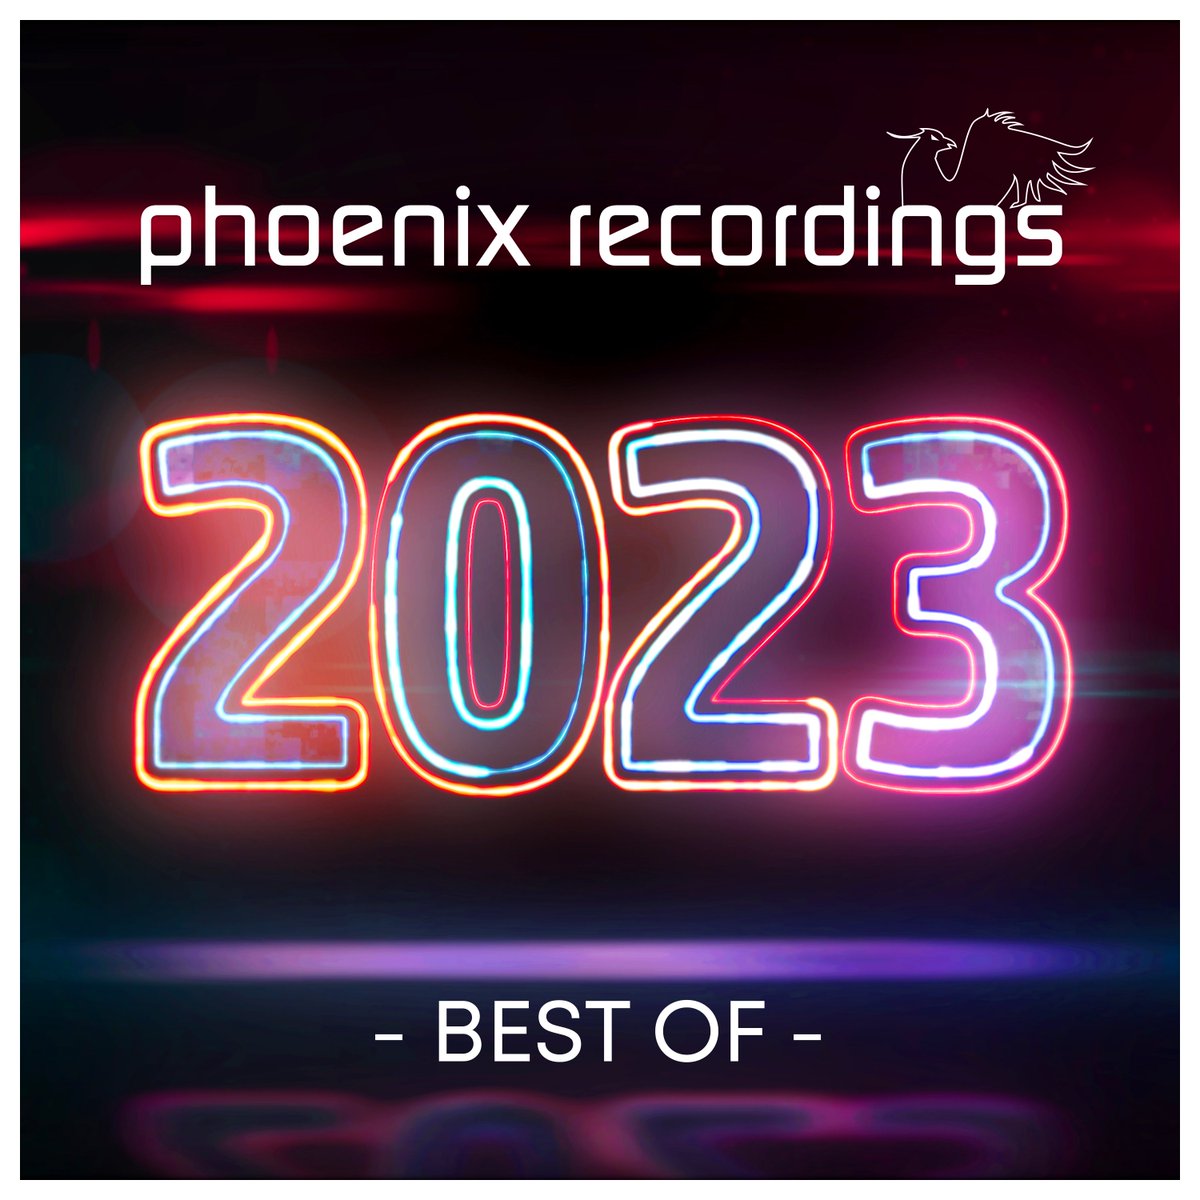 Best of Phoenix Recordings 2023 Listen: NIX.lnk.to/BestOf2023 Phoenix Recordings ended the year with the BEST OF compilation, a retrospective of the stunning music we released throughout the year. Thanks for your continuing support and admiration!